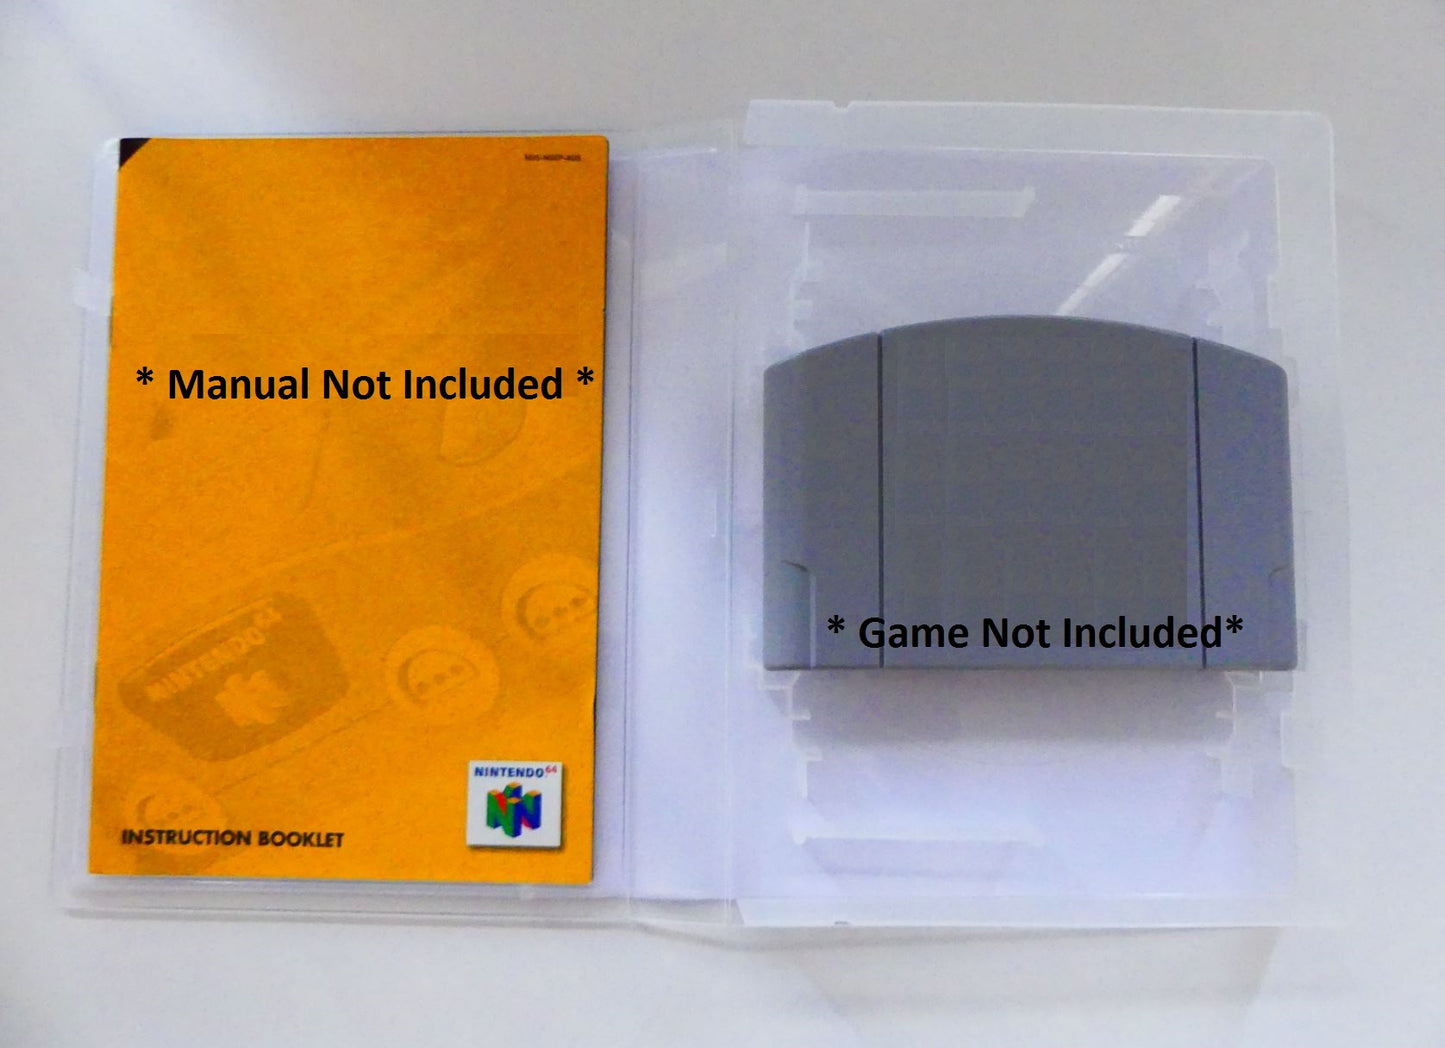 A Bug's Life - N64 Replacement Case